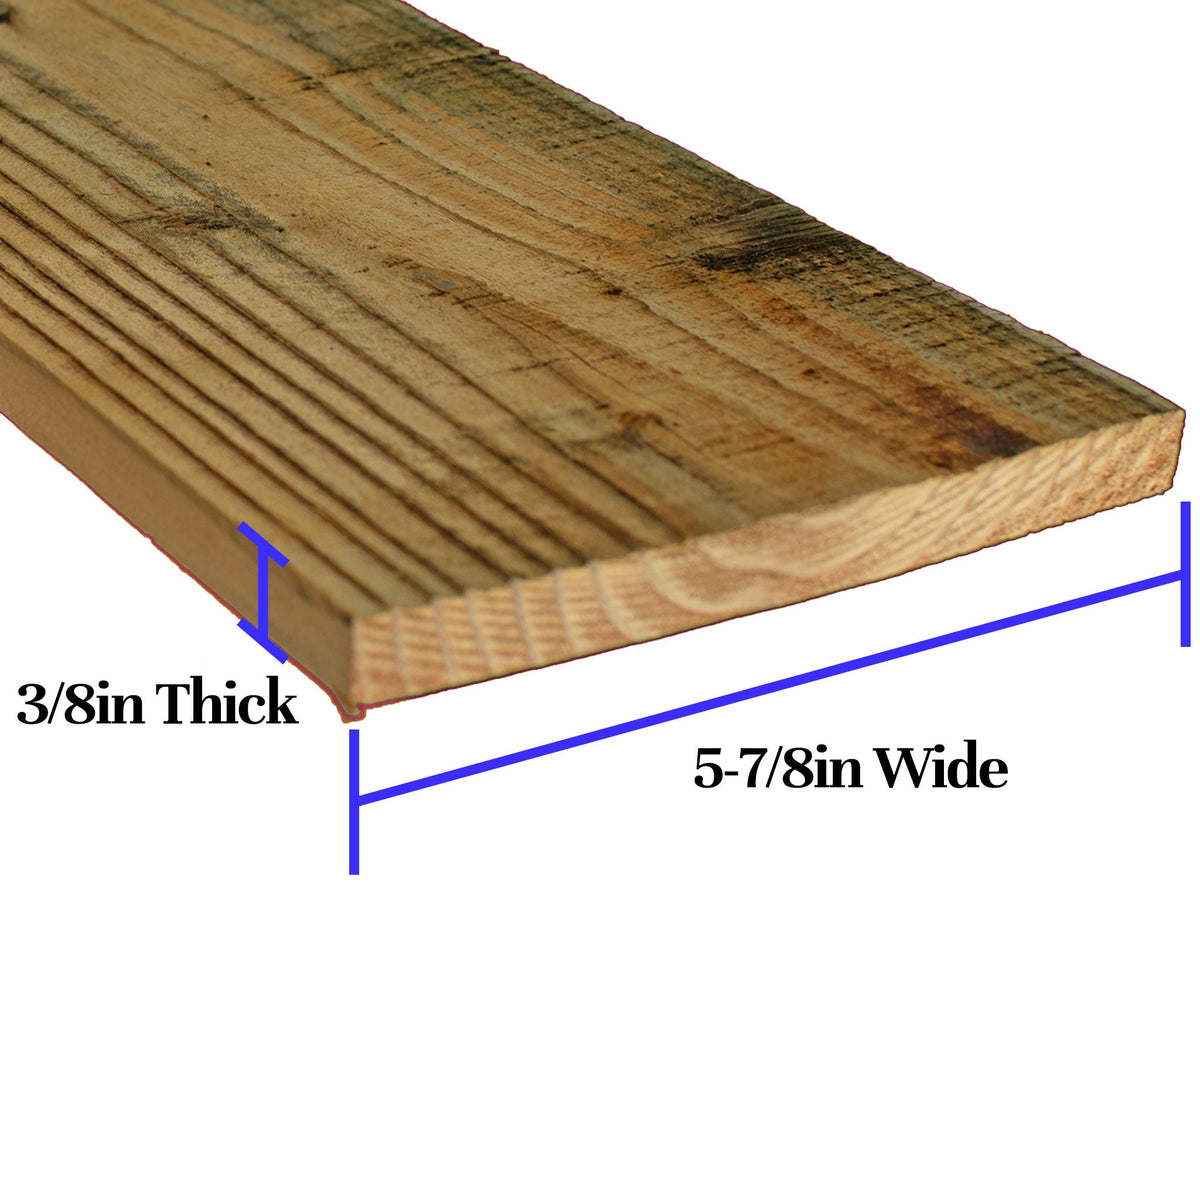 Wall Panels are made with 5-7/8in wide slats by 3/8in thickness.